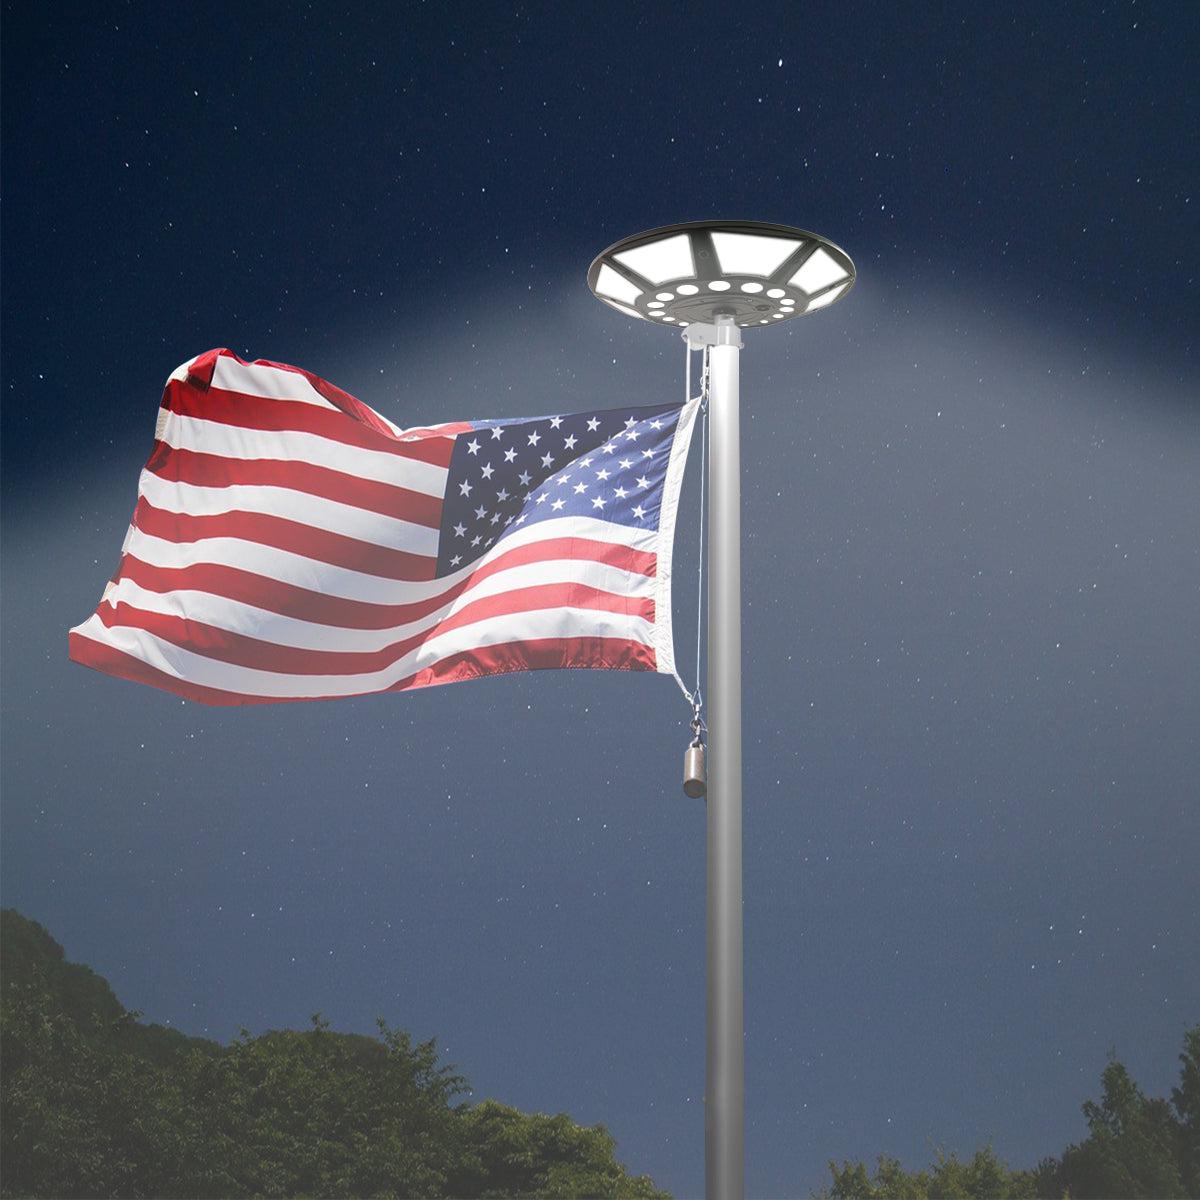 XL Disc Flagpole Solar Light ecommended for flagpoles up to 35 ft. in height